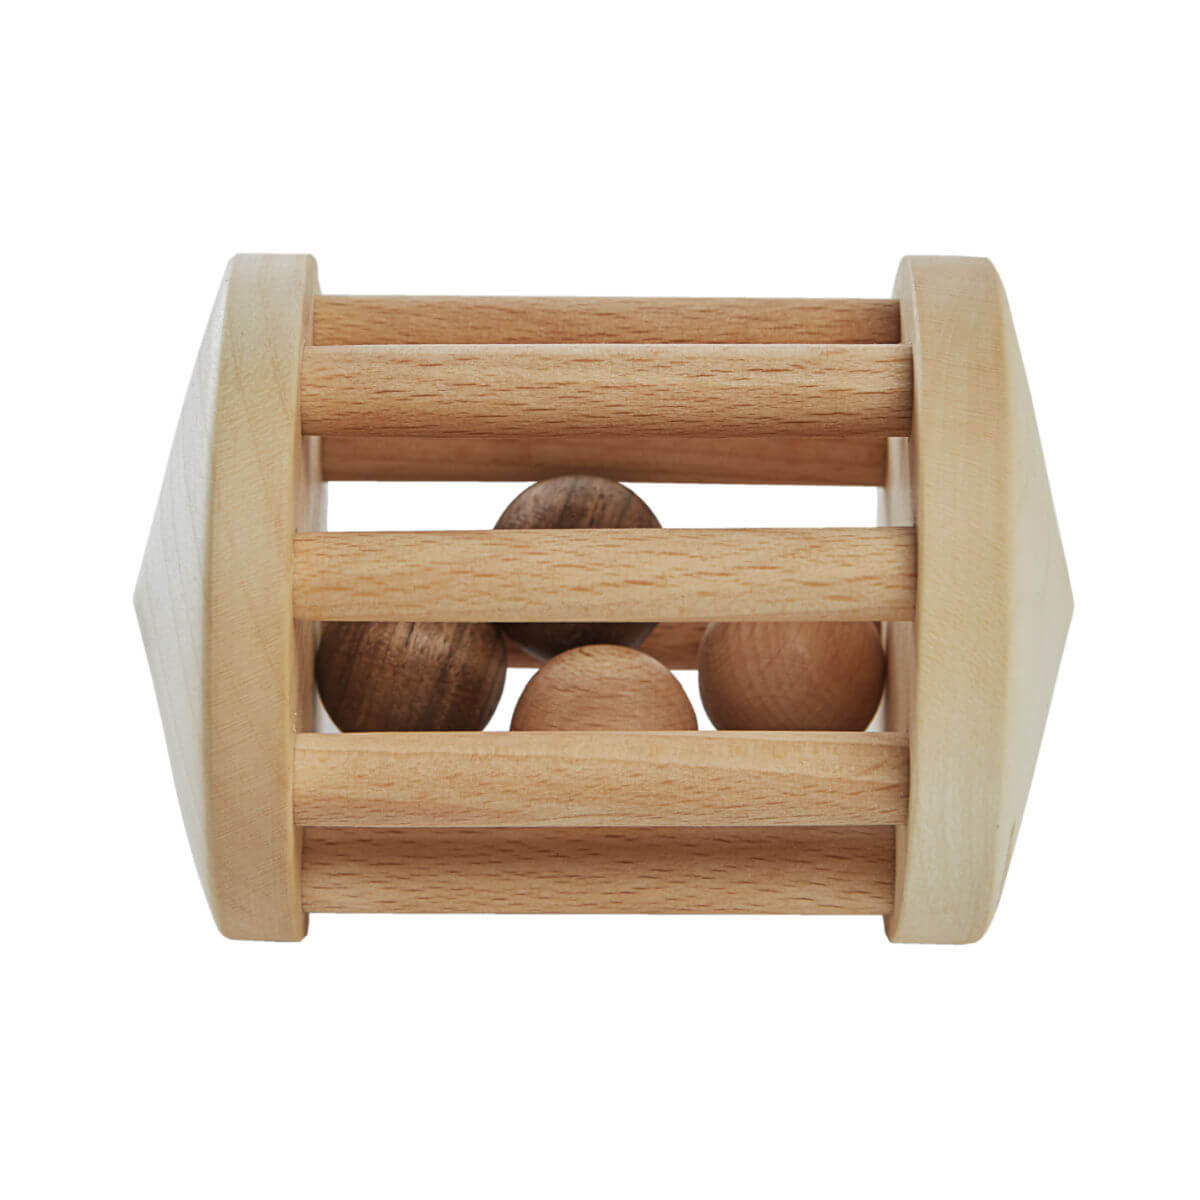 turtle dove handmade wooden rattle by wooden story